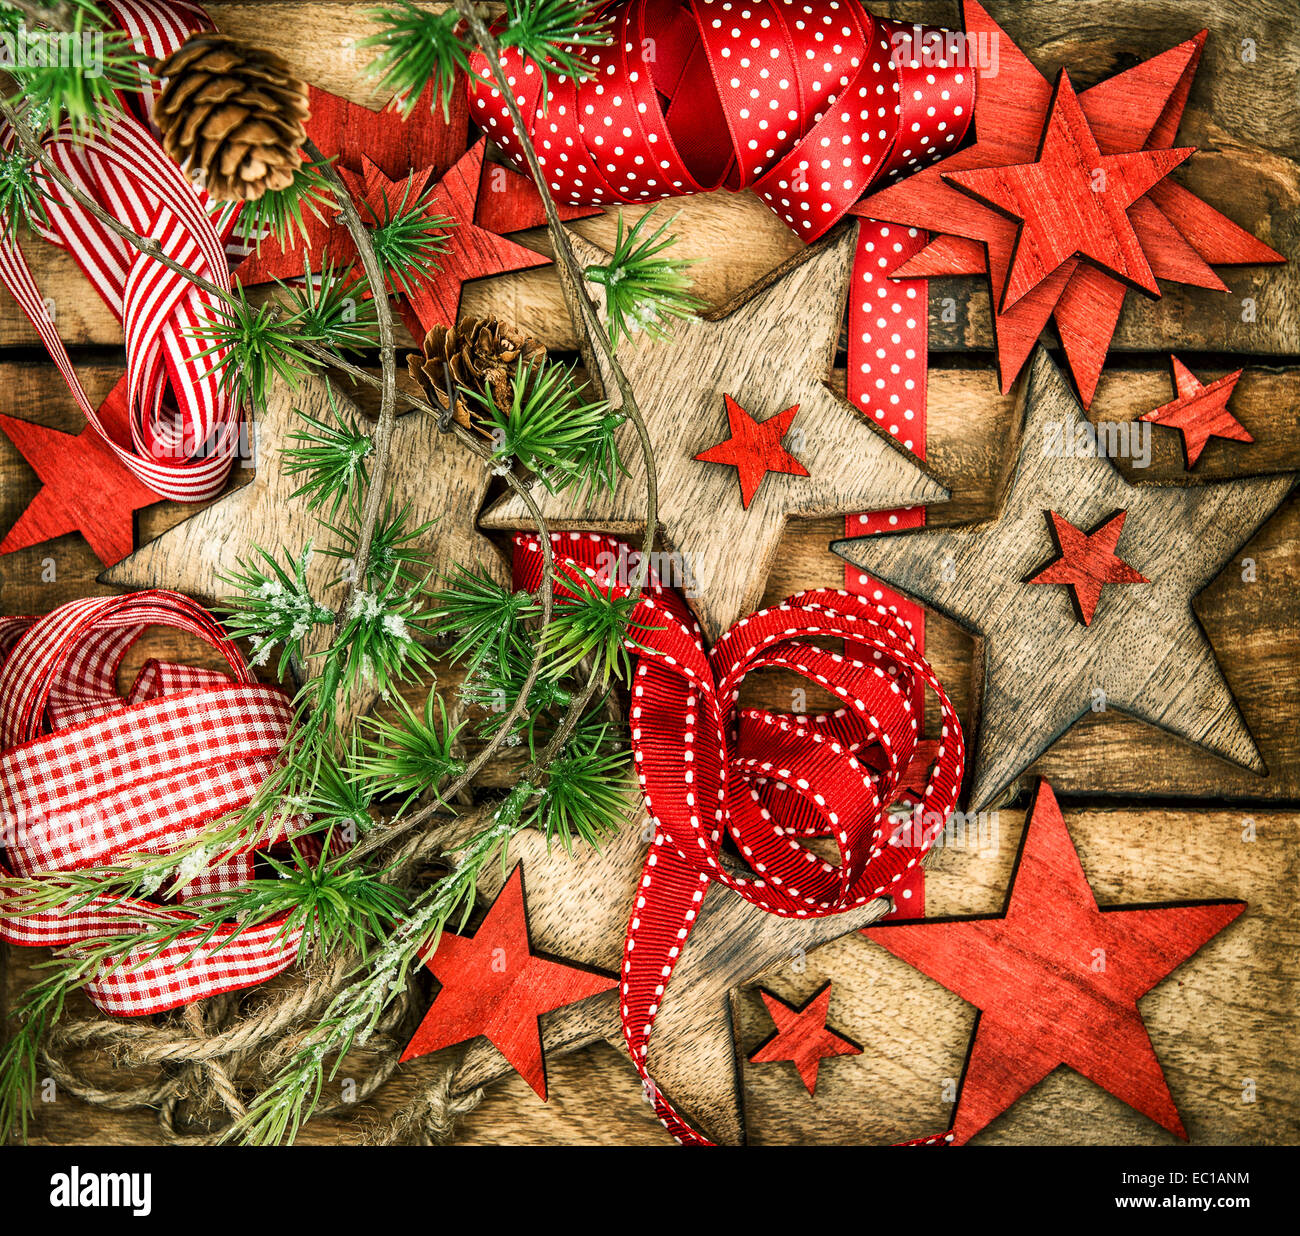 christmas decorations wooden stars and red ribbons for gifts wrapping. nostalgic retro style toned picture Stock Photo